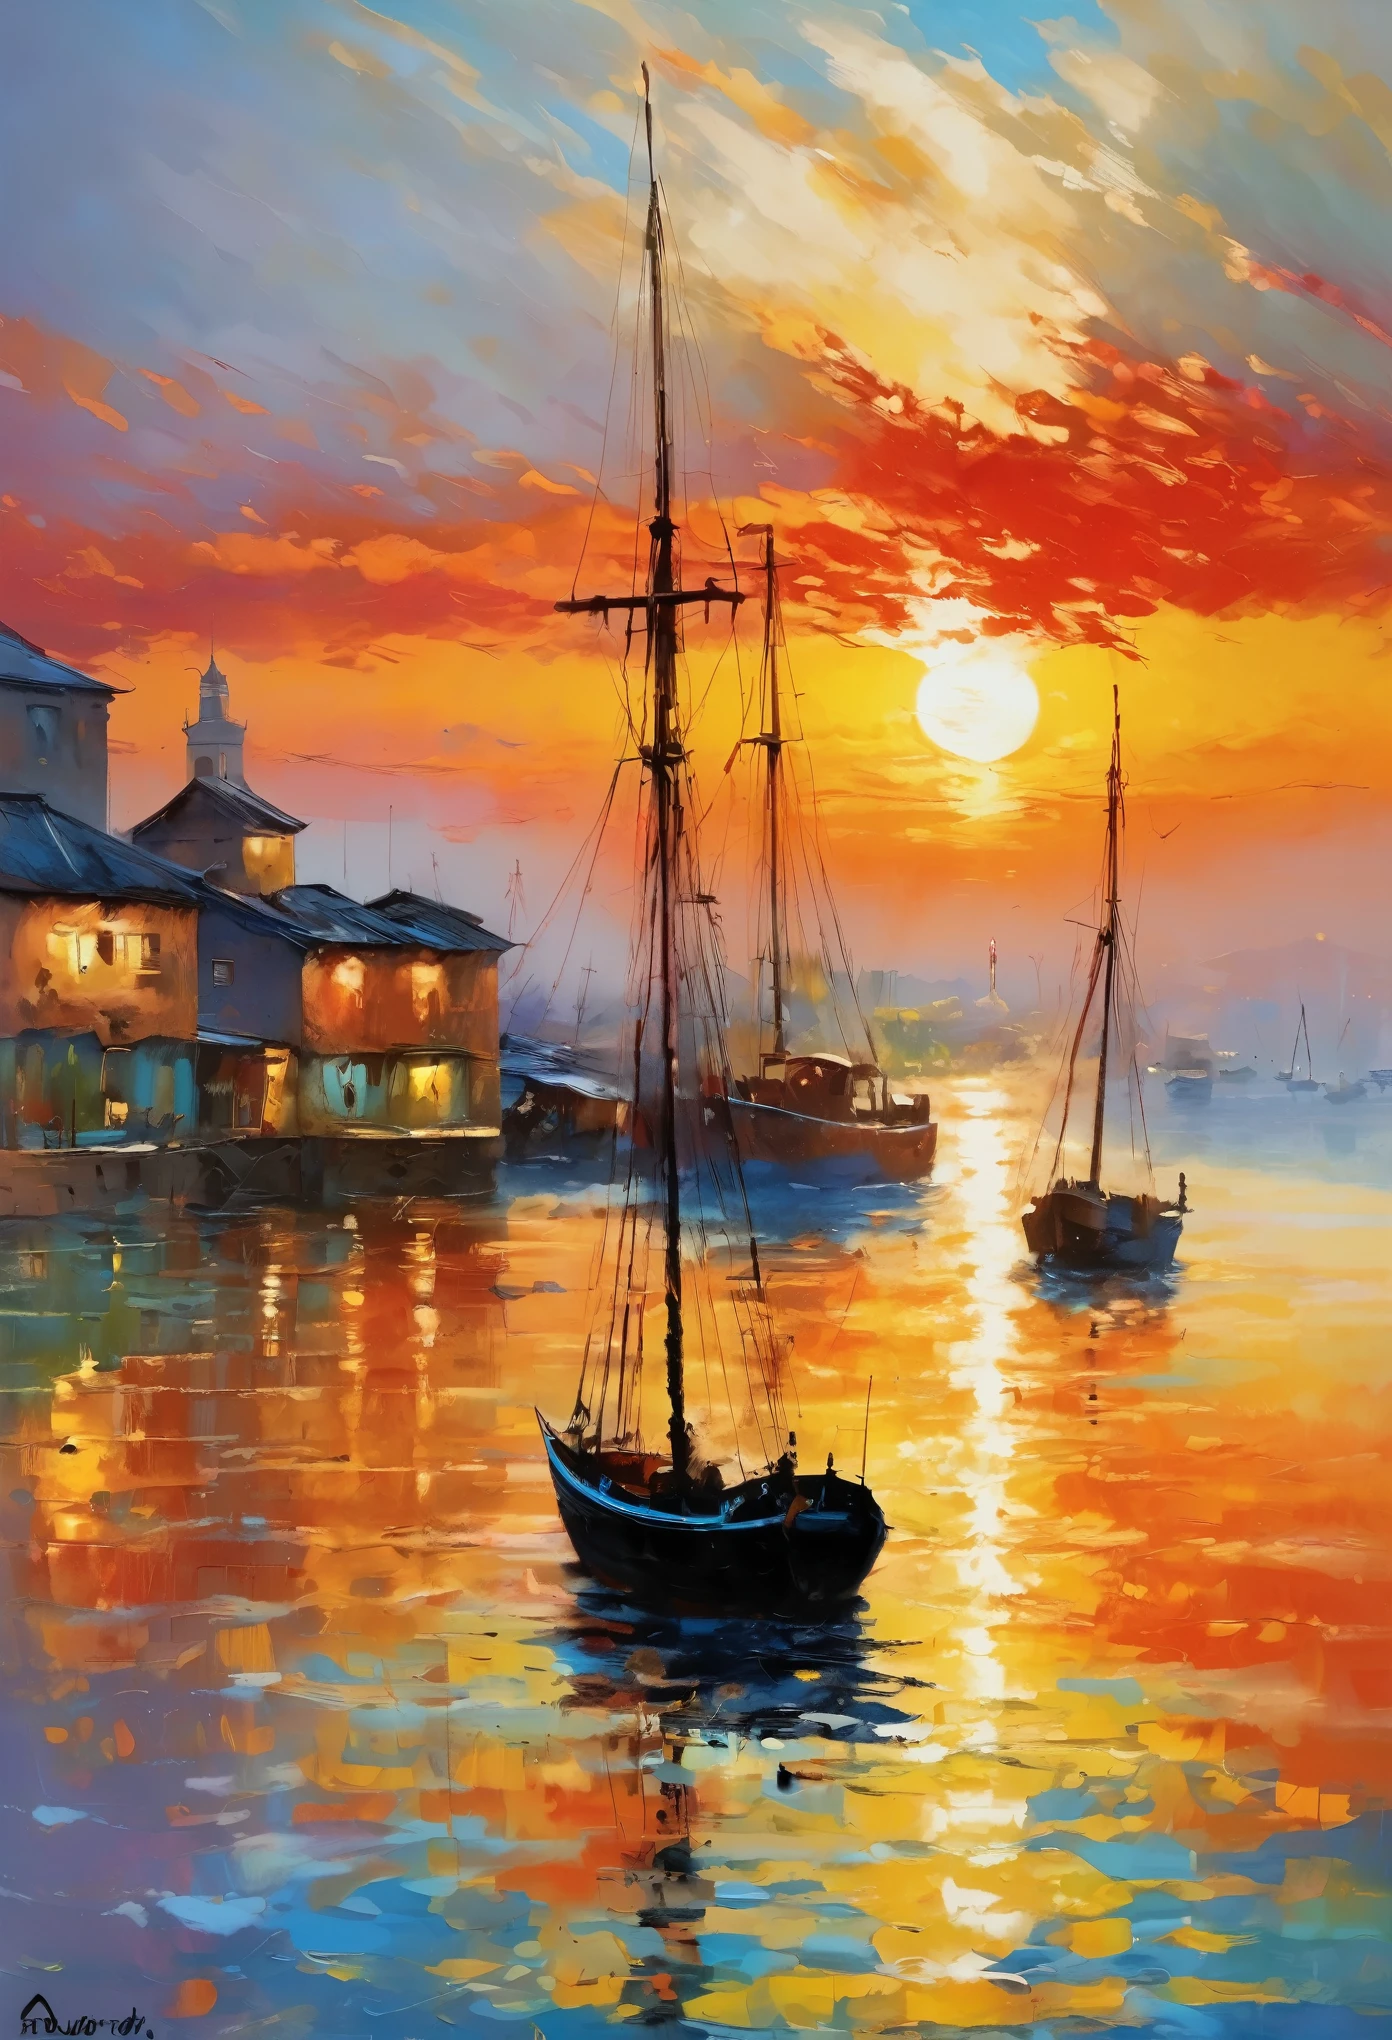 Cozy rooms, Big oil on the wall, Painter of Light, Monet's paintings, Impressionist painting, oil, Harbour sunrise scenery, The sea is depicted with bold, improvised brushstrokes、A distant view of the port, completely shrouded in mist, The rising red sun is the accent, The soft colors and gentle brushstrokes create a tranquil atmosphere.。The focus of the image is on impression、The painting itself is a masterpiece、Impeccable writing、Bold brushstrokes、Impressionist feeling, The mysterious beauty of that moment, The wall on which the painting hangs is decorated with an elegant frame.、Enhances the overall aesthetic appeal。Warm lighting、The elegant combination of rooms creates an enchanting atmosphere.、It invites the viewer to immerse themselves in the serenity and beauty of the depicted moment.。The image is、To truly capture the essence of the painting and its surroundings、Top quality with high resolution and ultra-detailed rendering。The art style is、Emphasis on realistic and photorealistic expression、Reflecting traditional oil techniques。The colors are warm and inviting、Highlight the rich colors of the sunset、Infuse a room with a warm glow。Lighting、Make your painting stand out、Add depth and dimension to the entire scene。